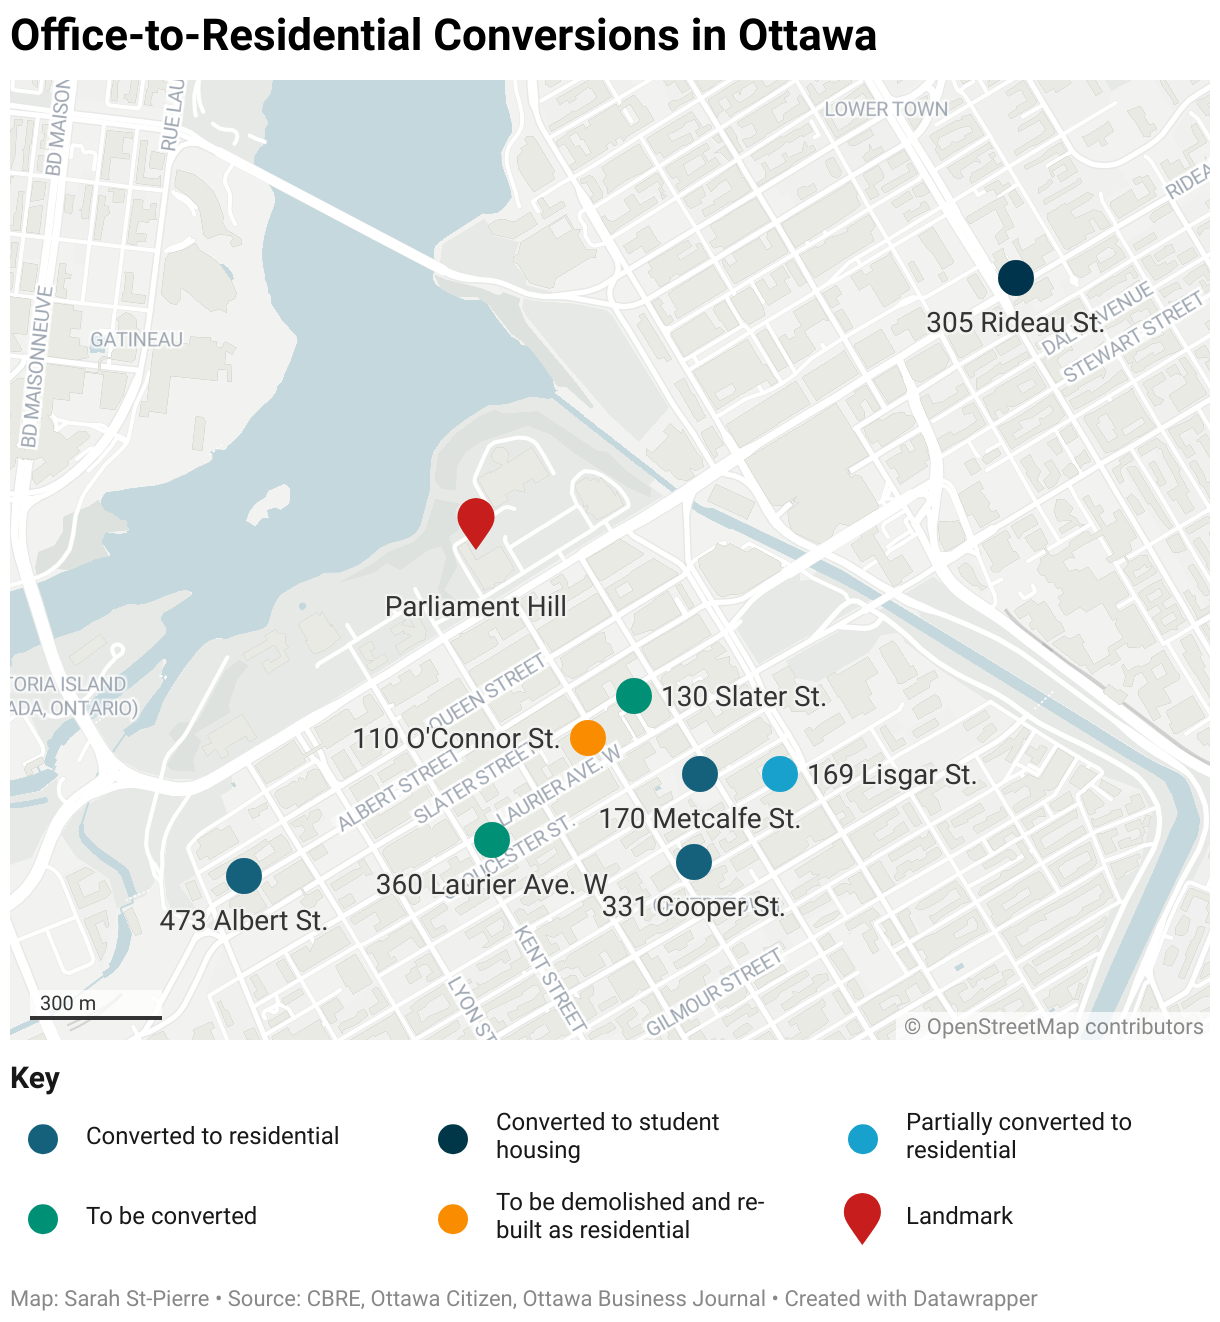 A map detailing the locations of conversions in Ottawa. Among completed conversion are 473 Albert St., 331 Cooper St., 170 Metcalfe St., 169 Lisgar St. and 305 Rideau St. Addresses currently slated for conversion are 360 Laurier Ave. W and 130 Slater St. One building is slated to be demolished and built back into residential from scratch: 110 O'Connor St.